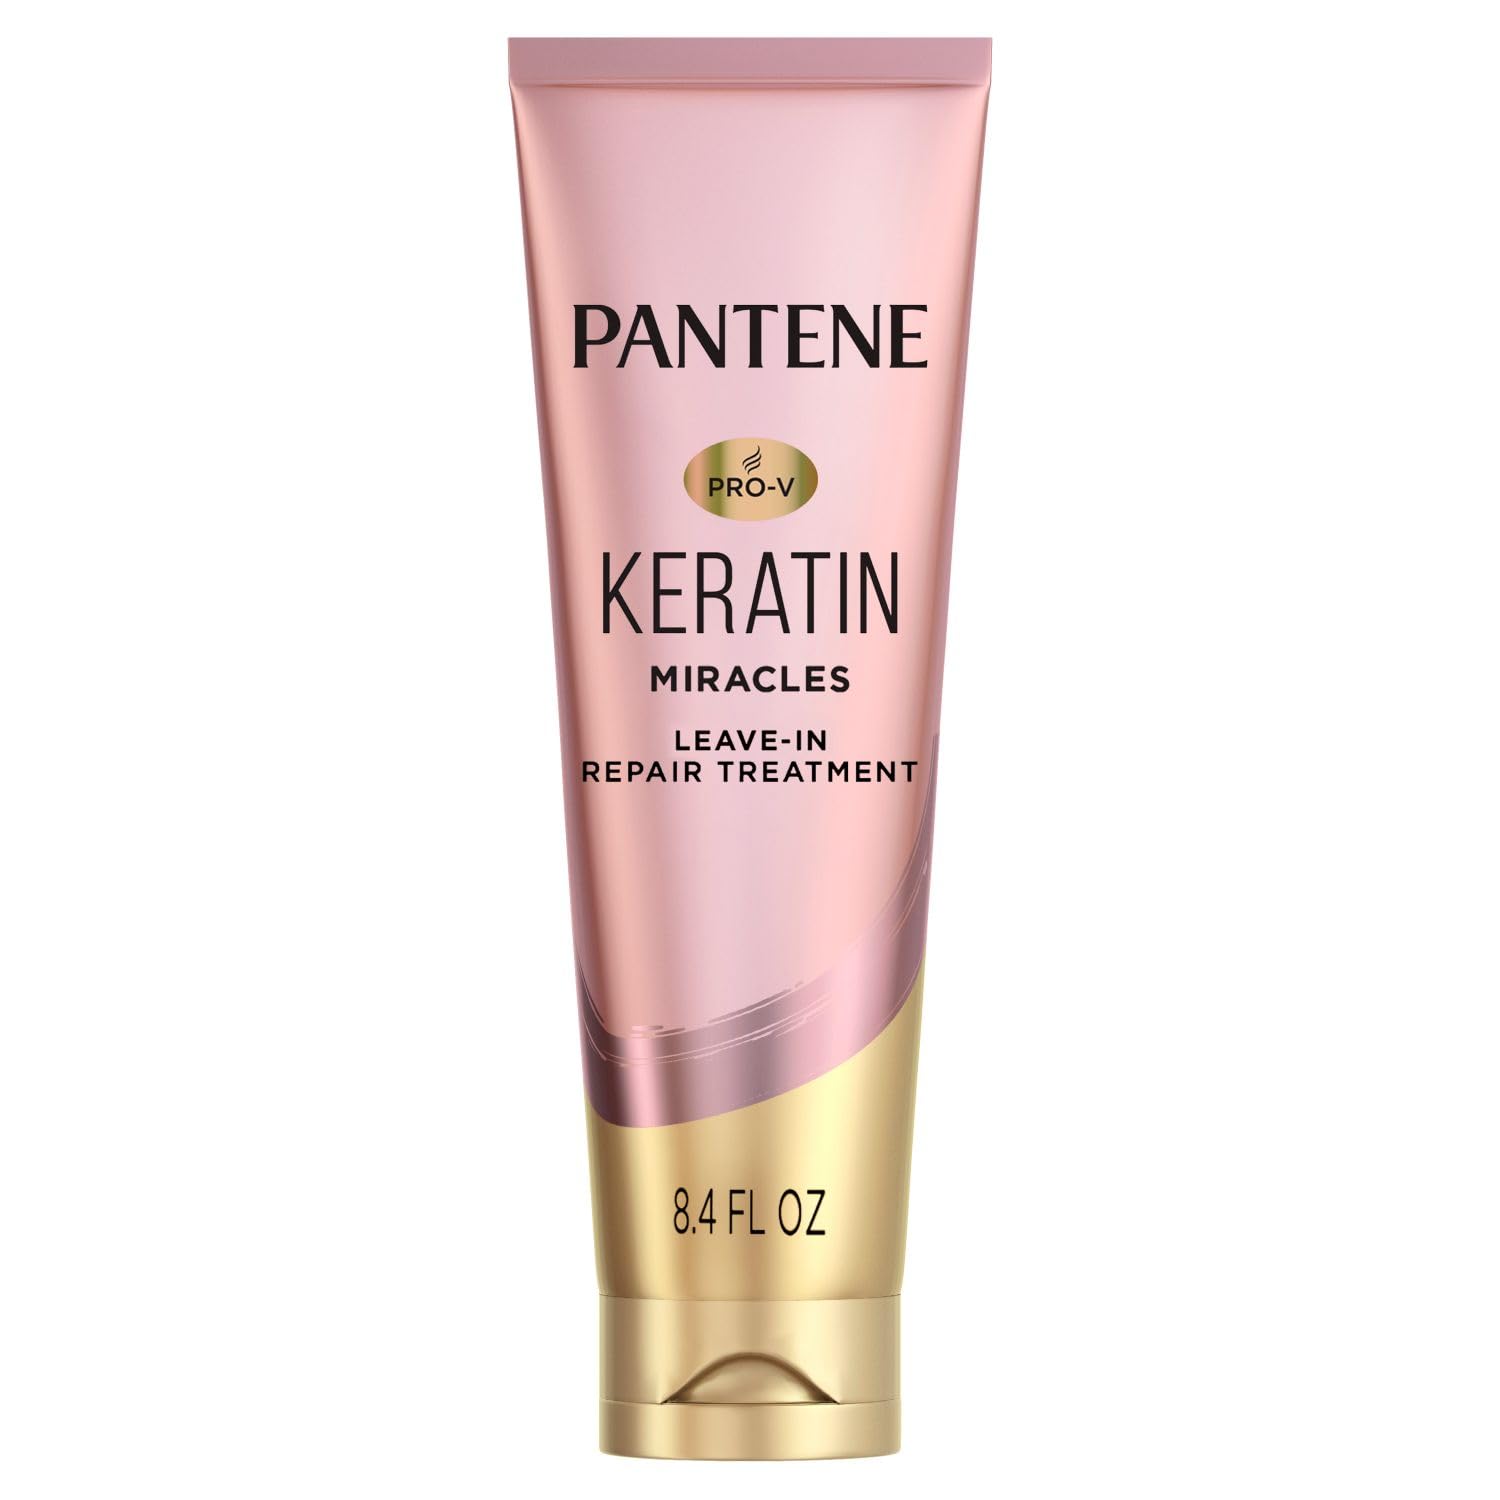 Pantene Keratin Hair Treatment, Protein Treatment, with Argan Oil, Repairs Split Ends, Protects Hair from Damage, for Dry Damaged Hair, Safe for Color Treated Hair, Formaldehyde Free, 8.4oz